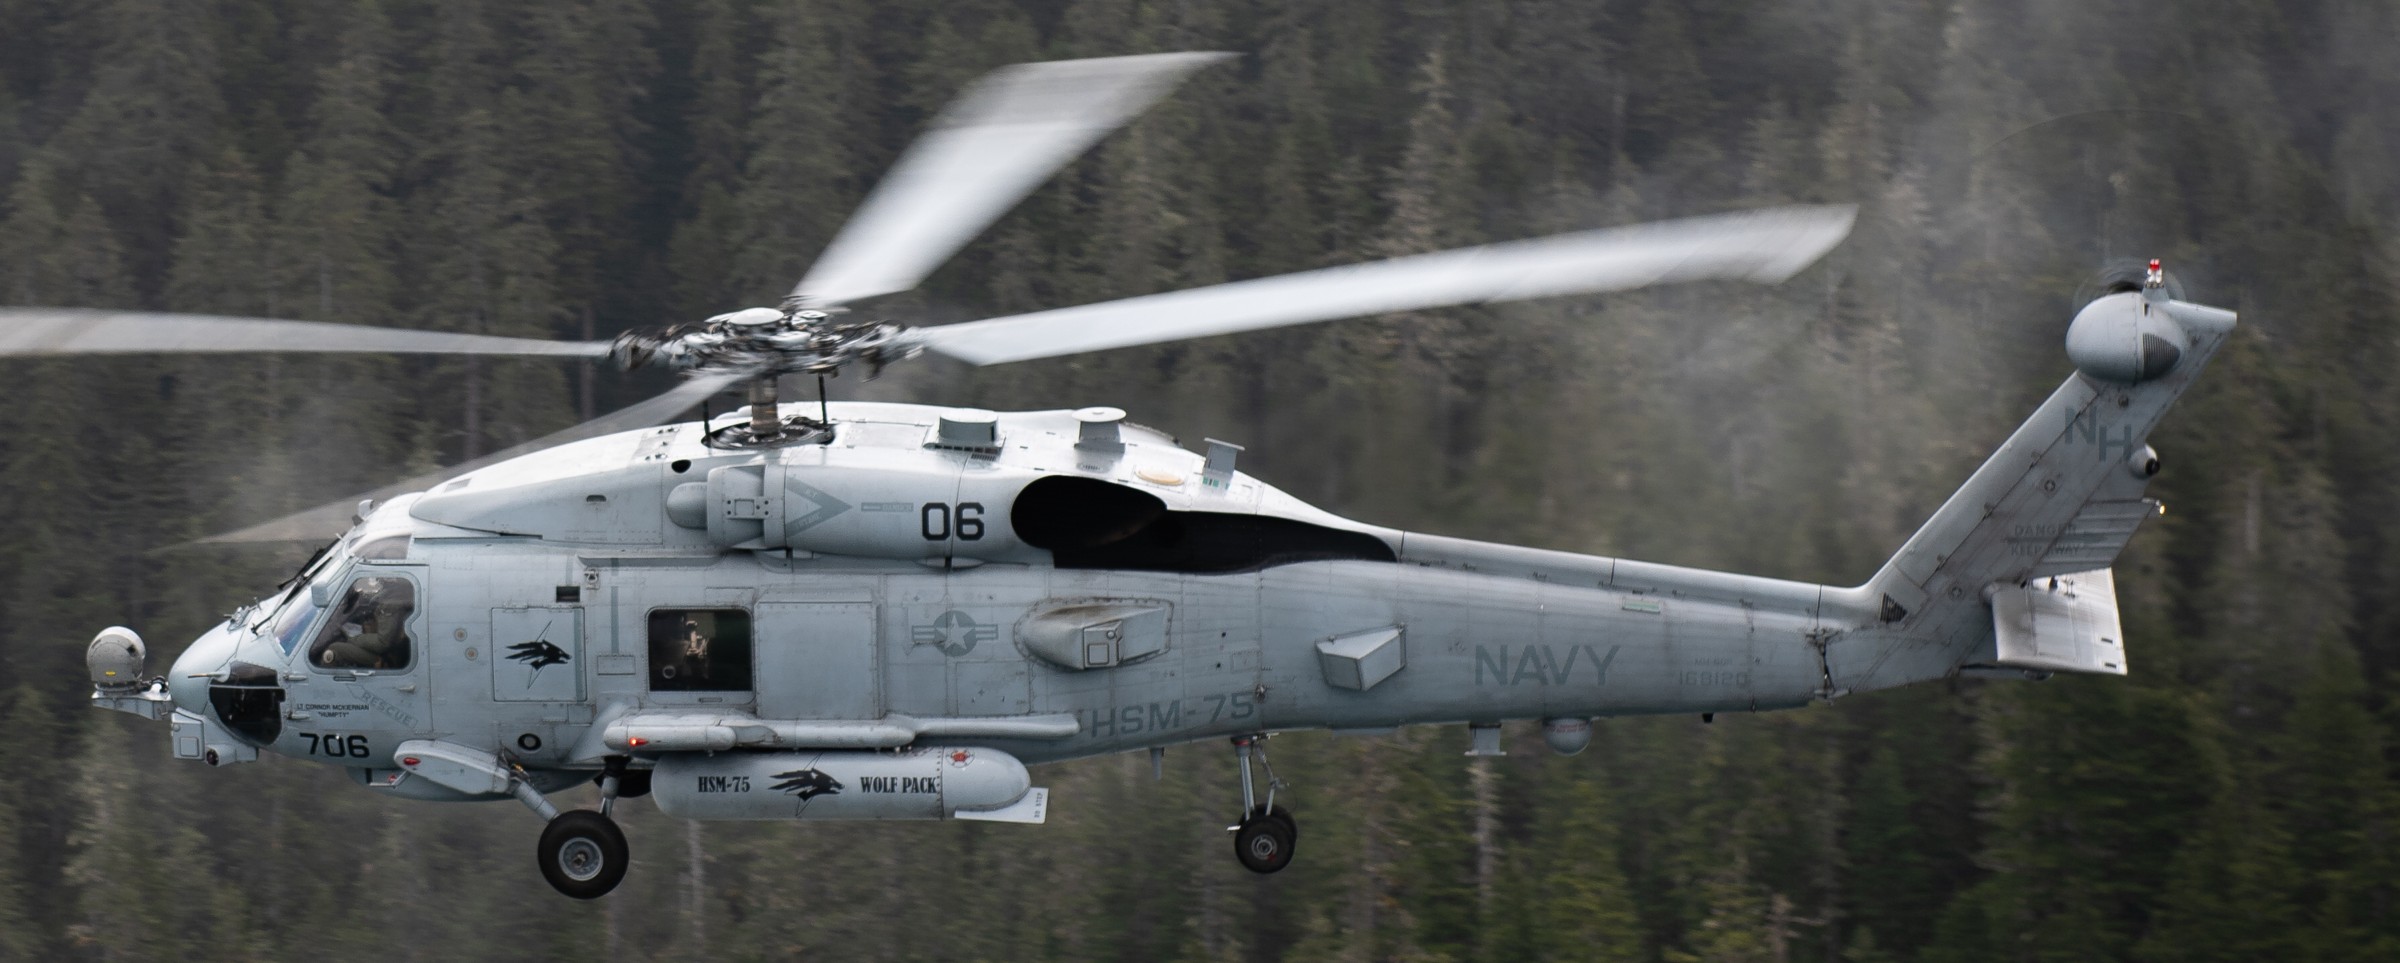 hsm-75 wolf pack helicopter maritime strike squadron mh-60r seahawk exercise northern edge 2019 28